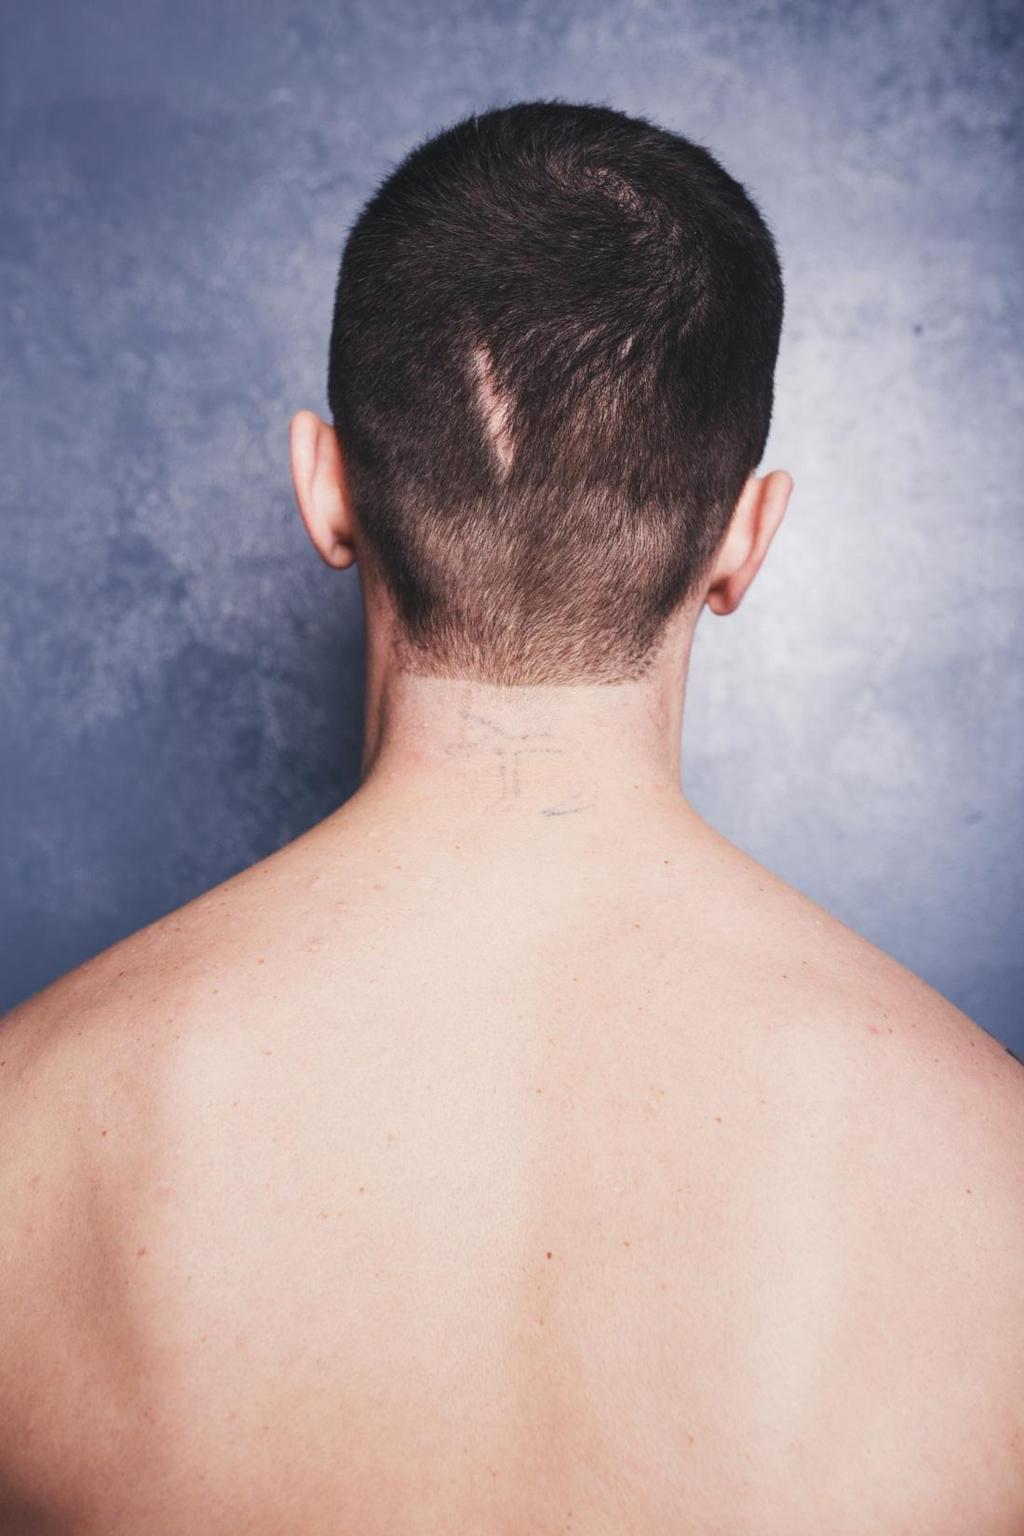 Types of Hair Loss Ciatrical Alopecia Ciatrical Alopecia is known as the scarring alopecia. When permanent scarring occurs, the hair will not experience any growth in the region.